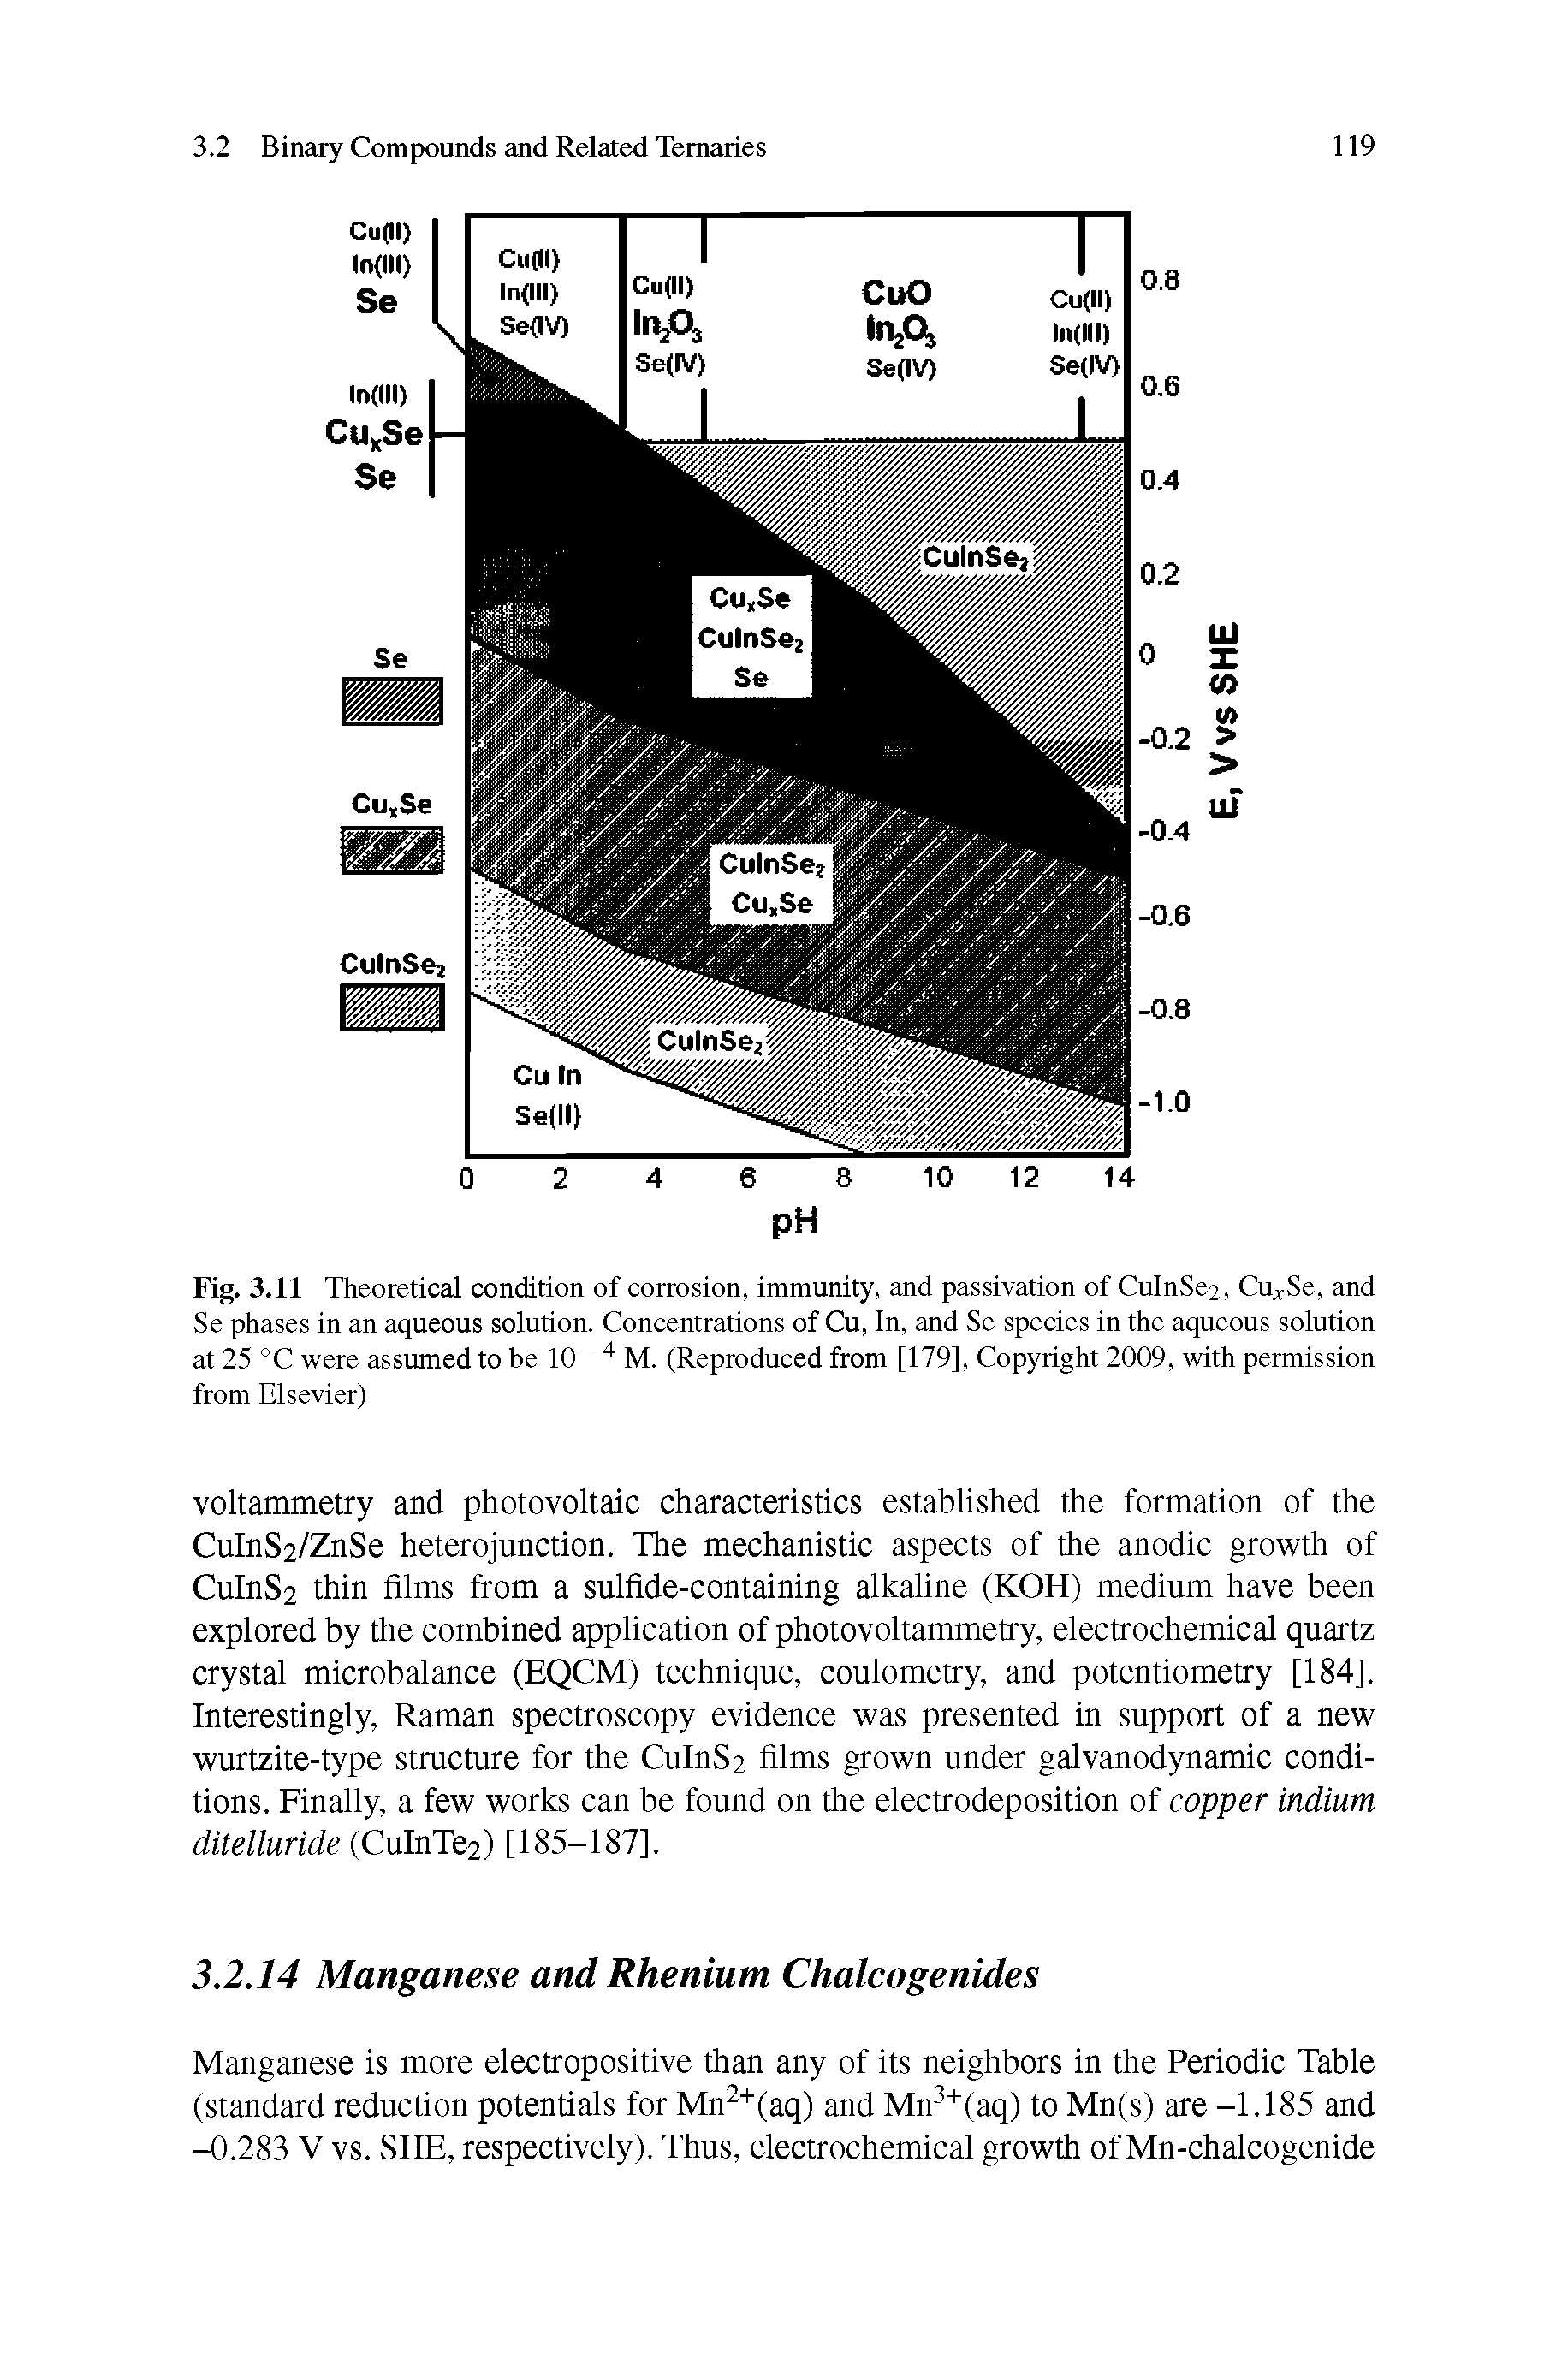 Fig. 3.11 Theoretical condition of corrosion, immunity, and passivation of CulnSe2, Cu Se, and Se phases in an aqueous solution. Concentrations of Cu, In, and Se species in the aqueous solution at 25 °C were assumed to be 10 M. (Reproduced from [179], Copyright 2009, with permission from Elsevier)...